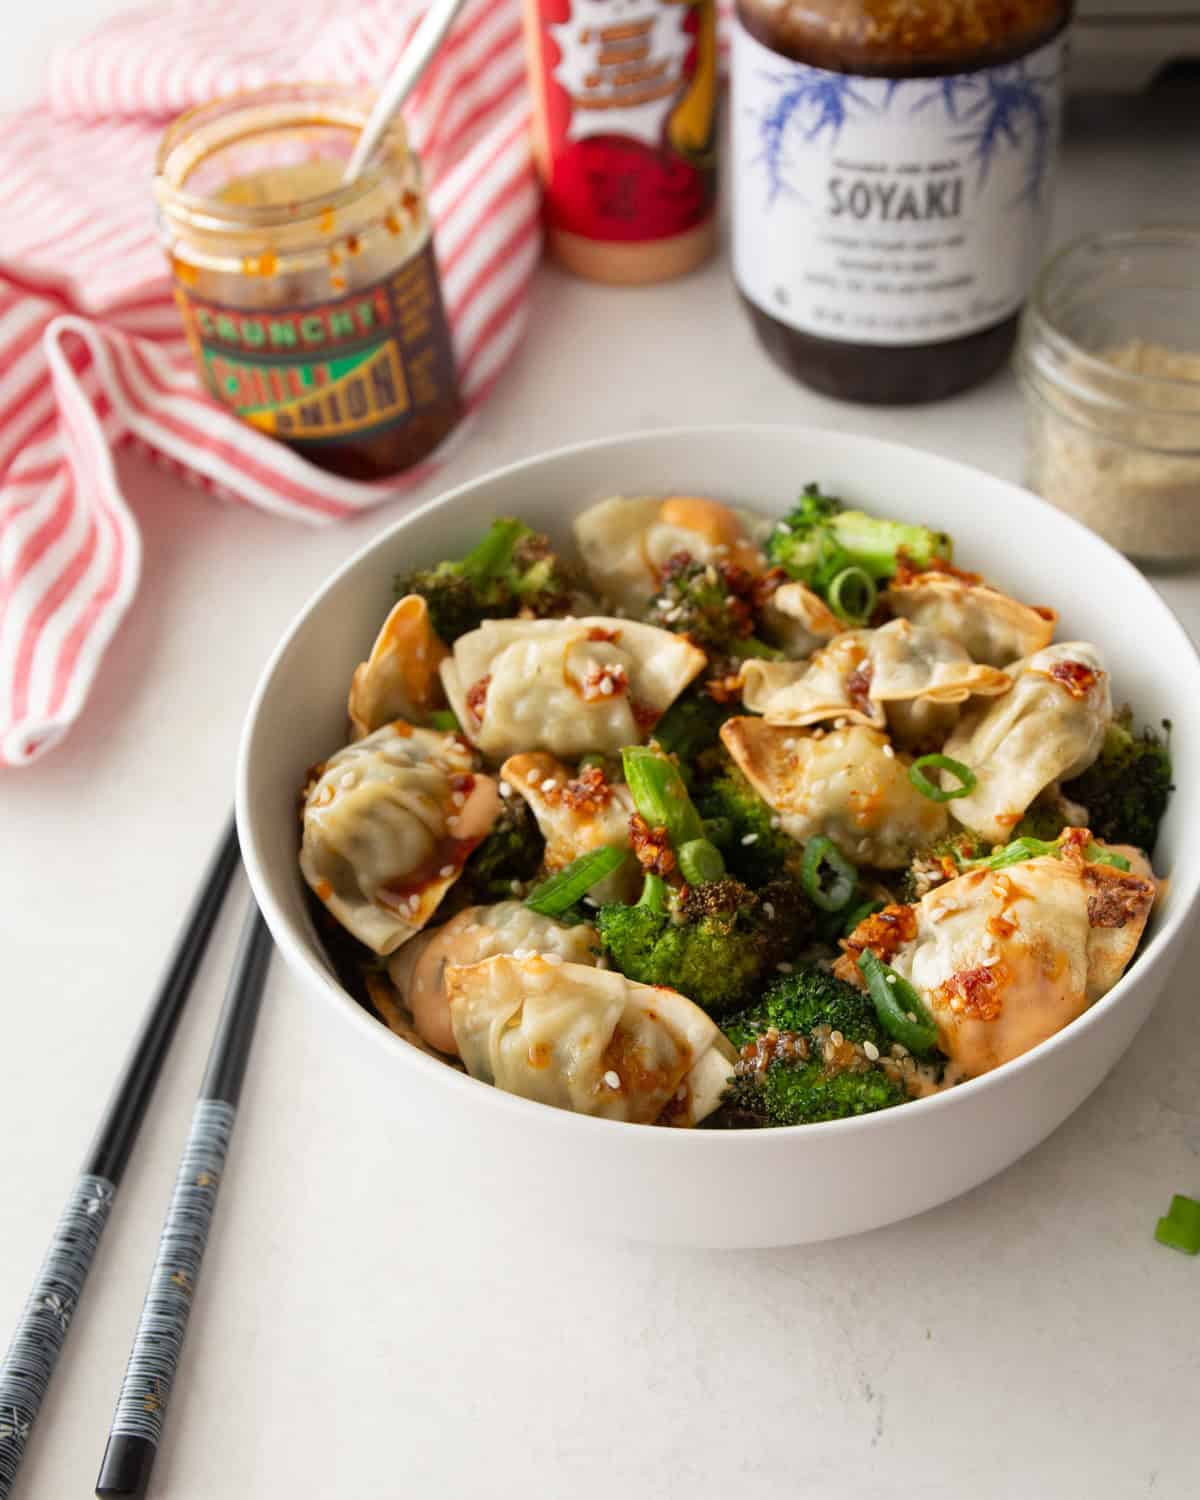 potstickers and broccoli in a white bowl on a white table